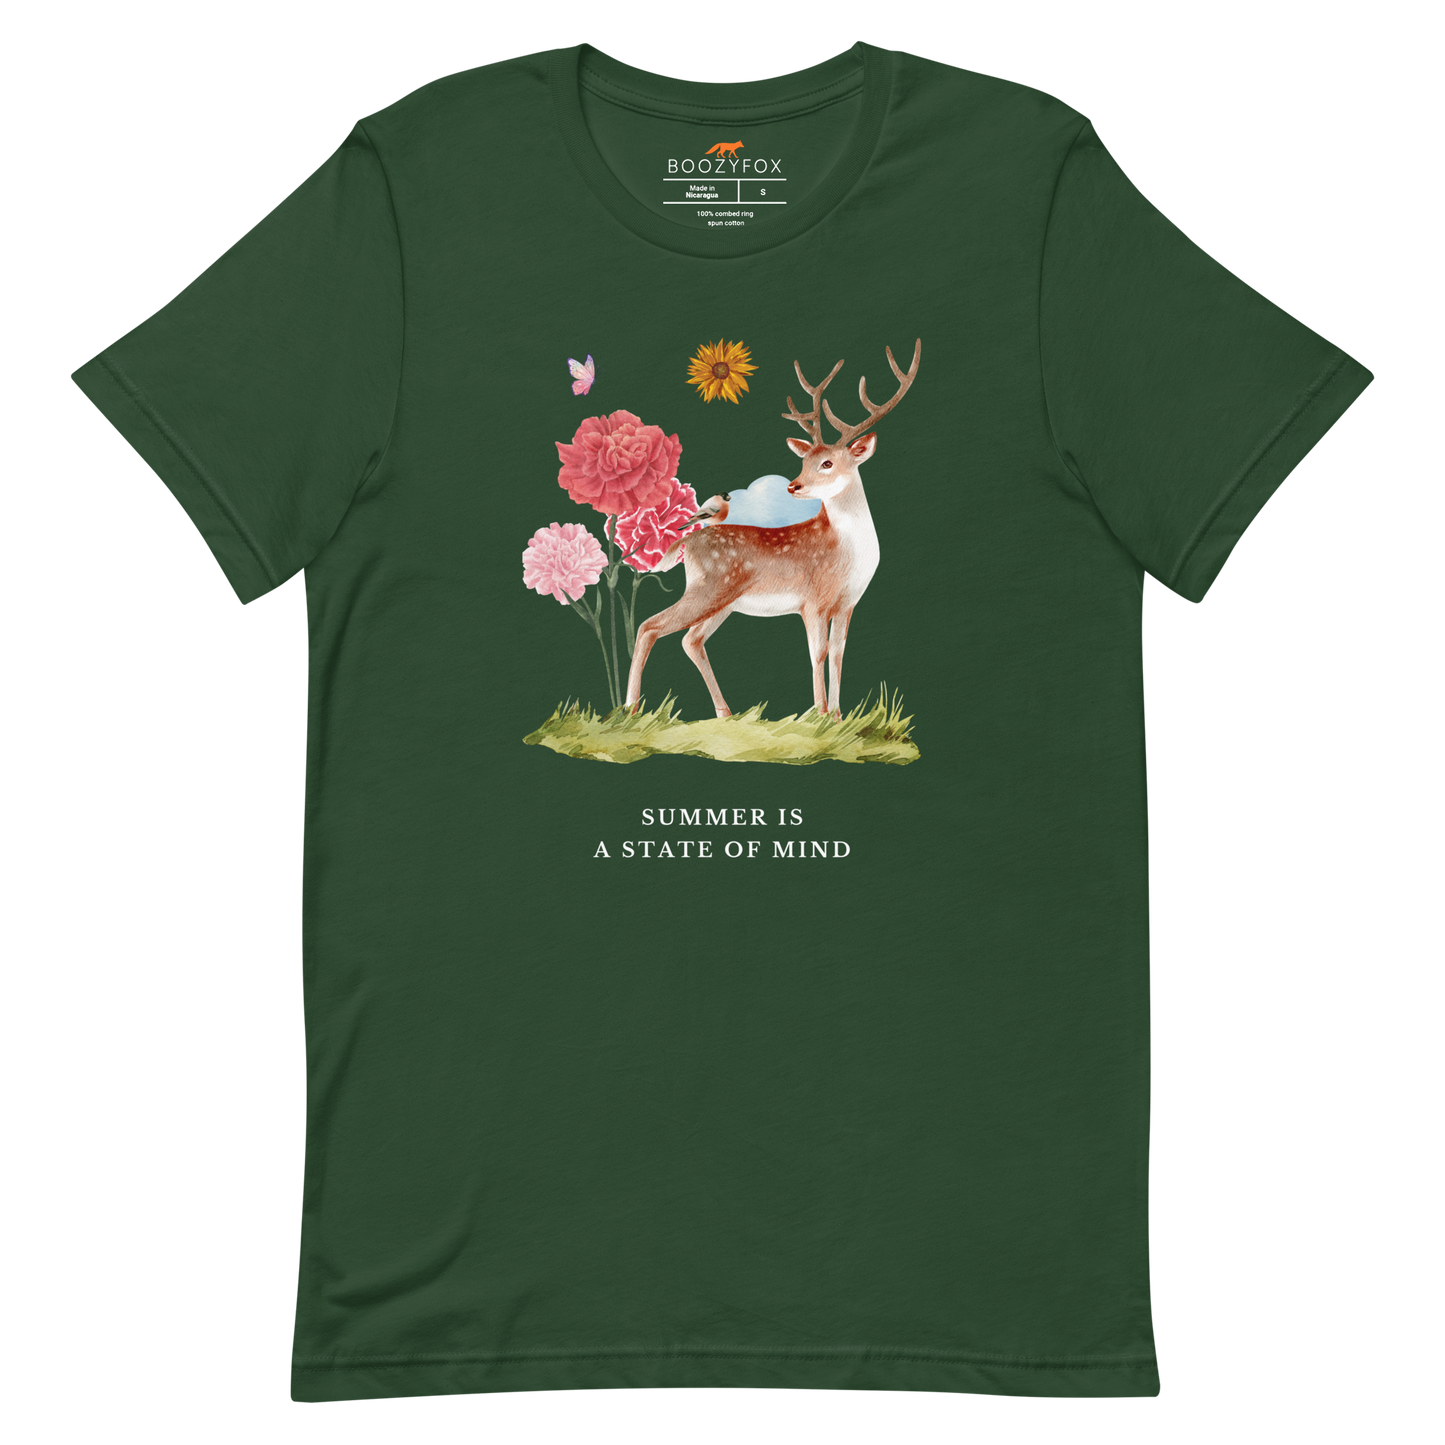 Forest Green Premium Summer Is a State of Mind Tee featuring a Summer Is a State of Mind graphic on the chest - Cute Graphic Summer Tees - Boozy Fox